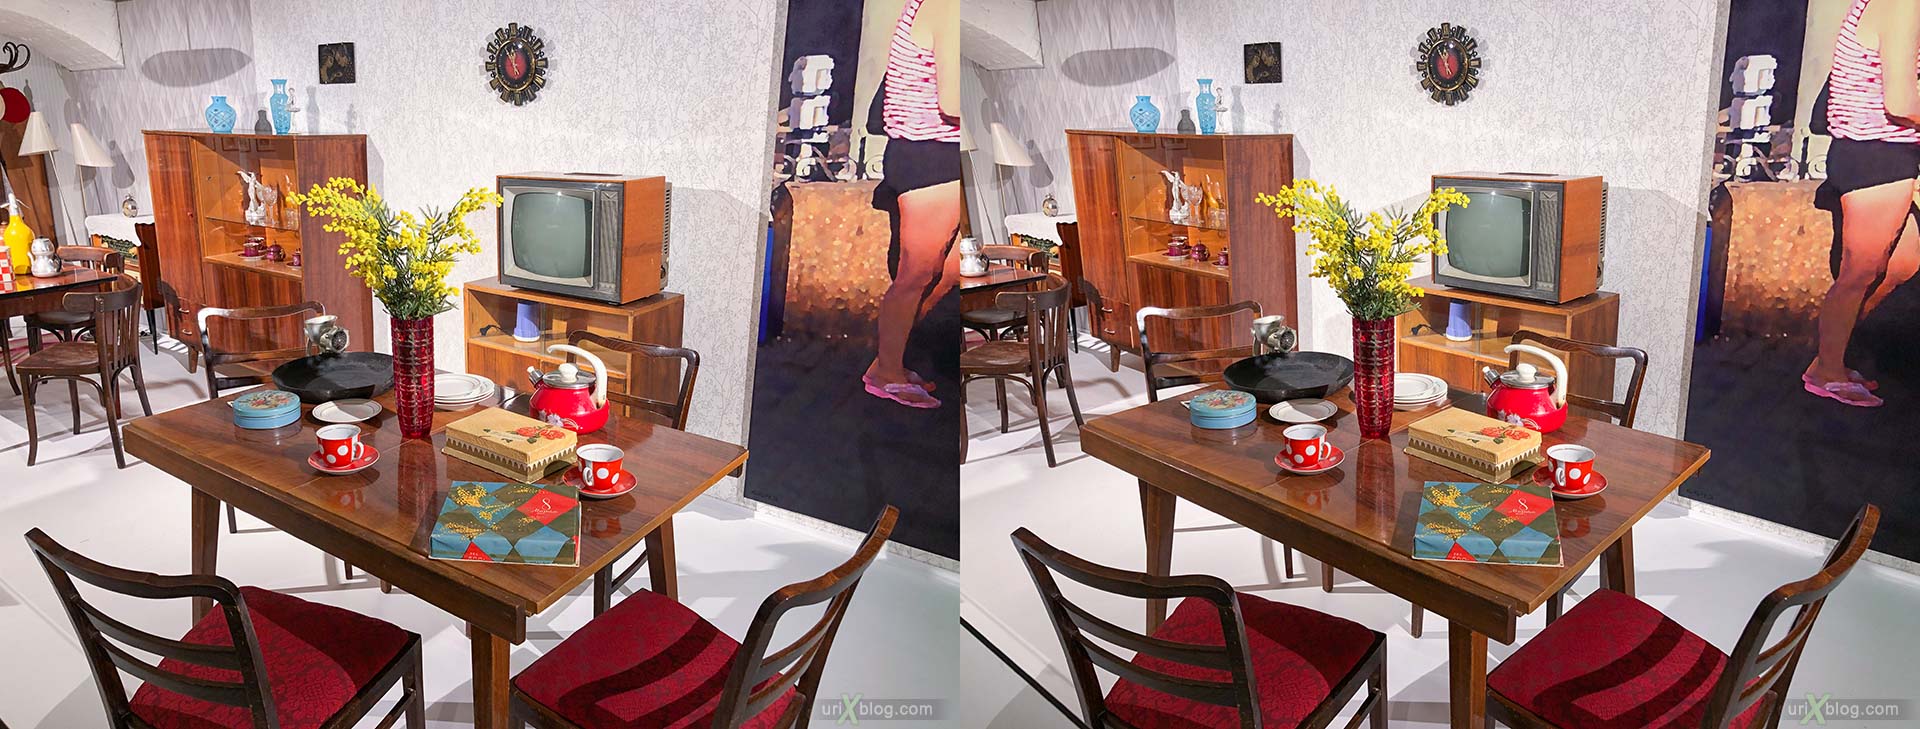 exhibition, Family values, Museum of Moscow, soviet life, apartment, toys, Moscow, Russia, 3D, stereo pair, cross-eyed, crossview, cross view stereo pair, stereoscopic